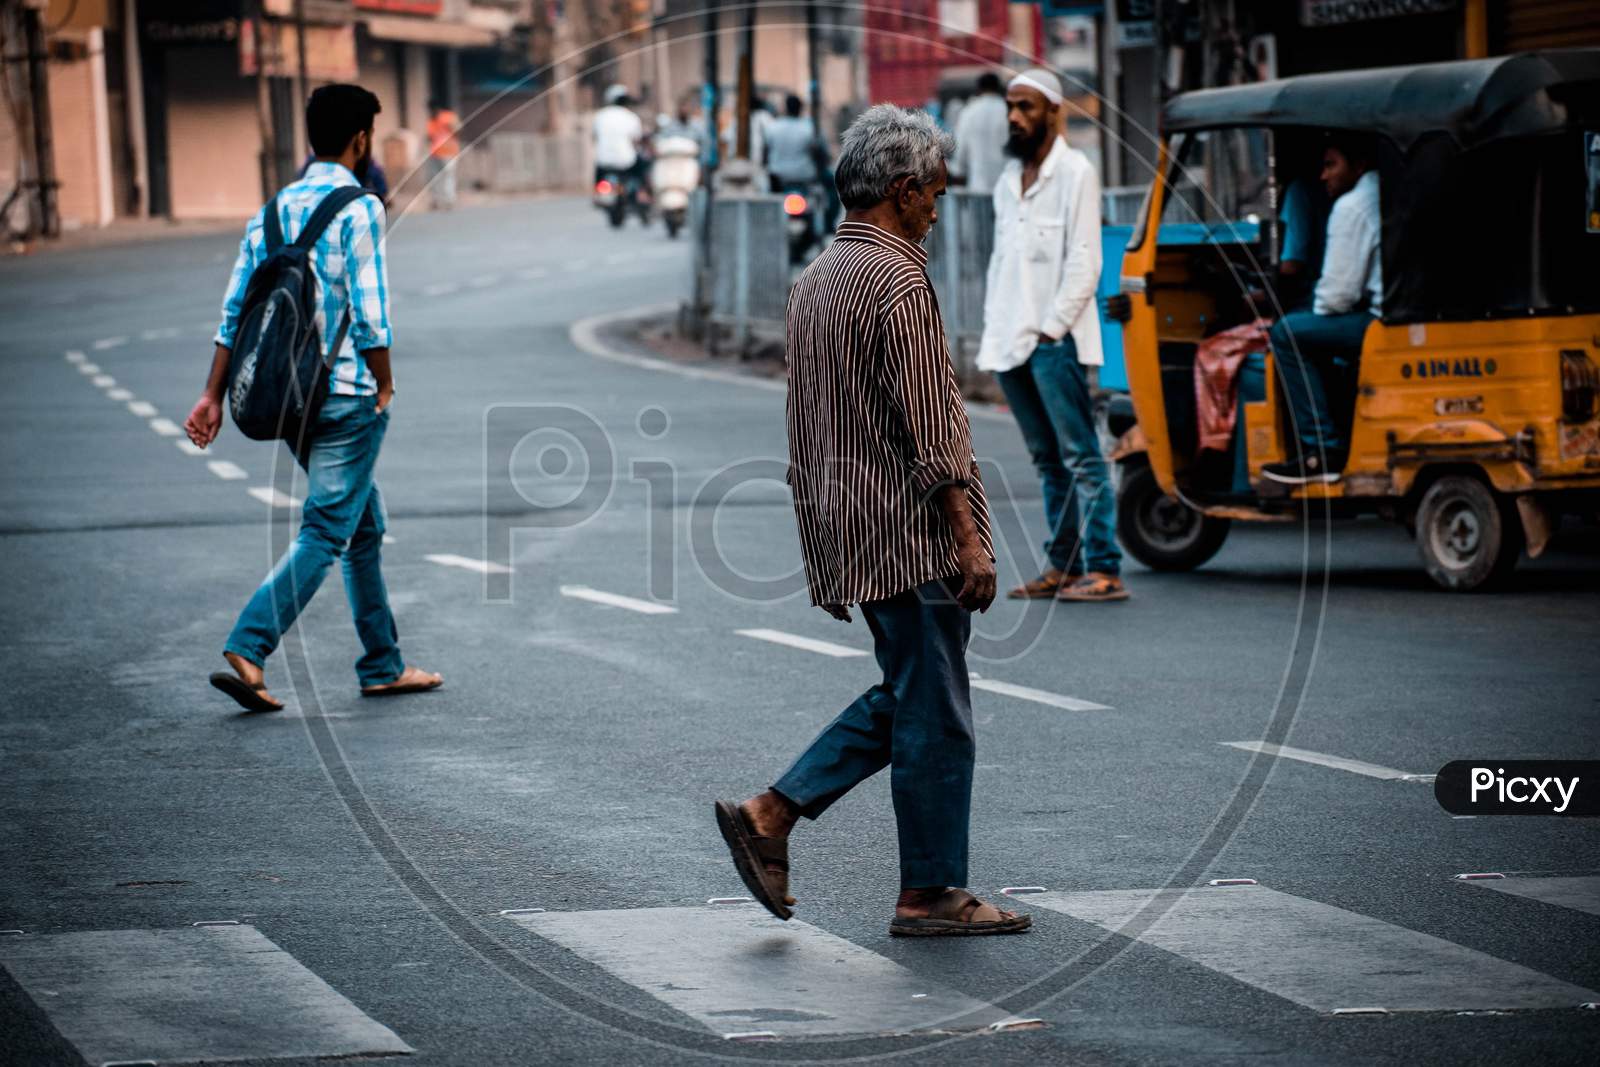 An Old Man Crossing Zebra Crossing At a Road